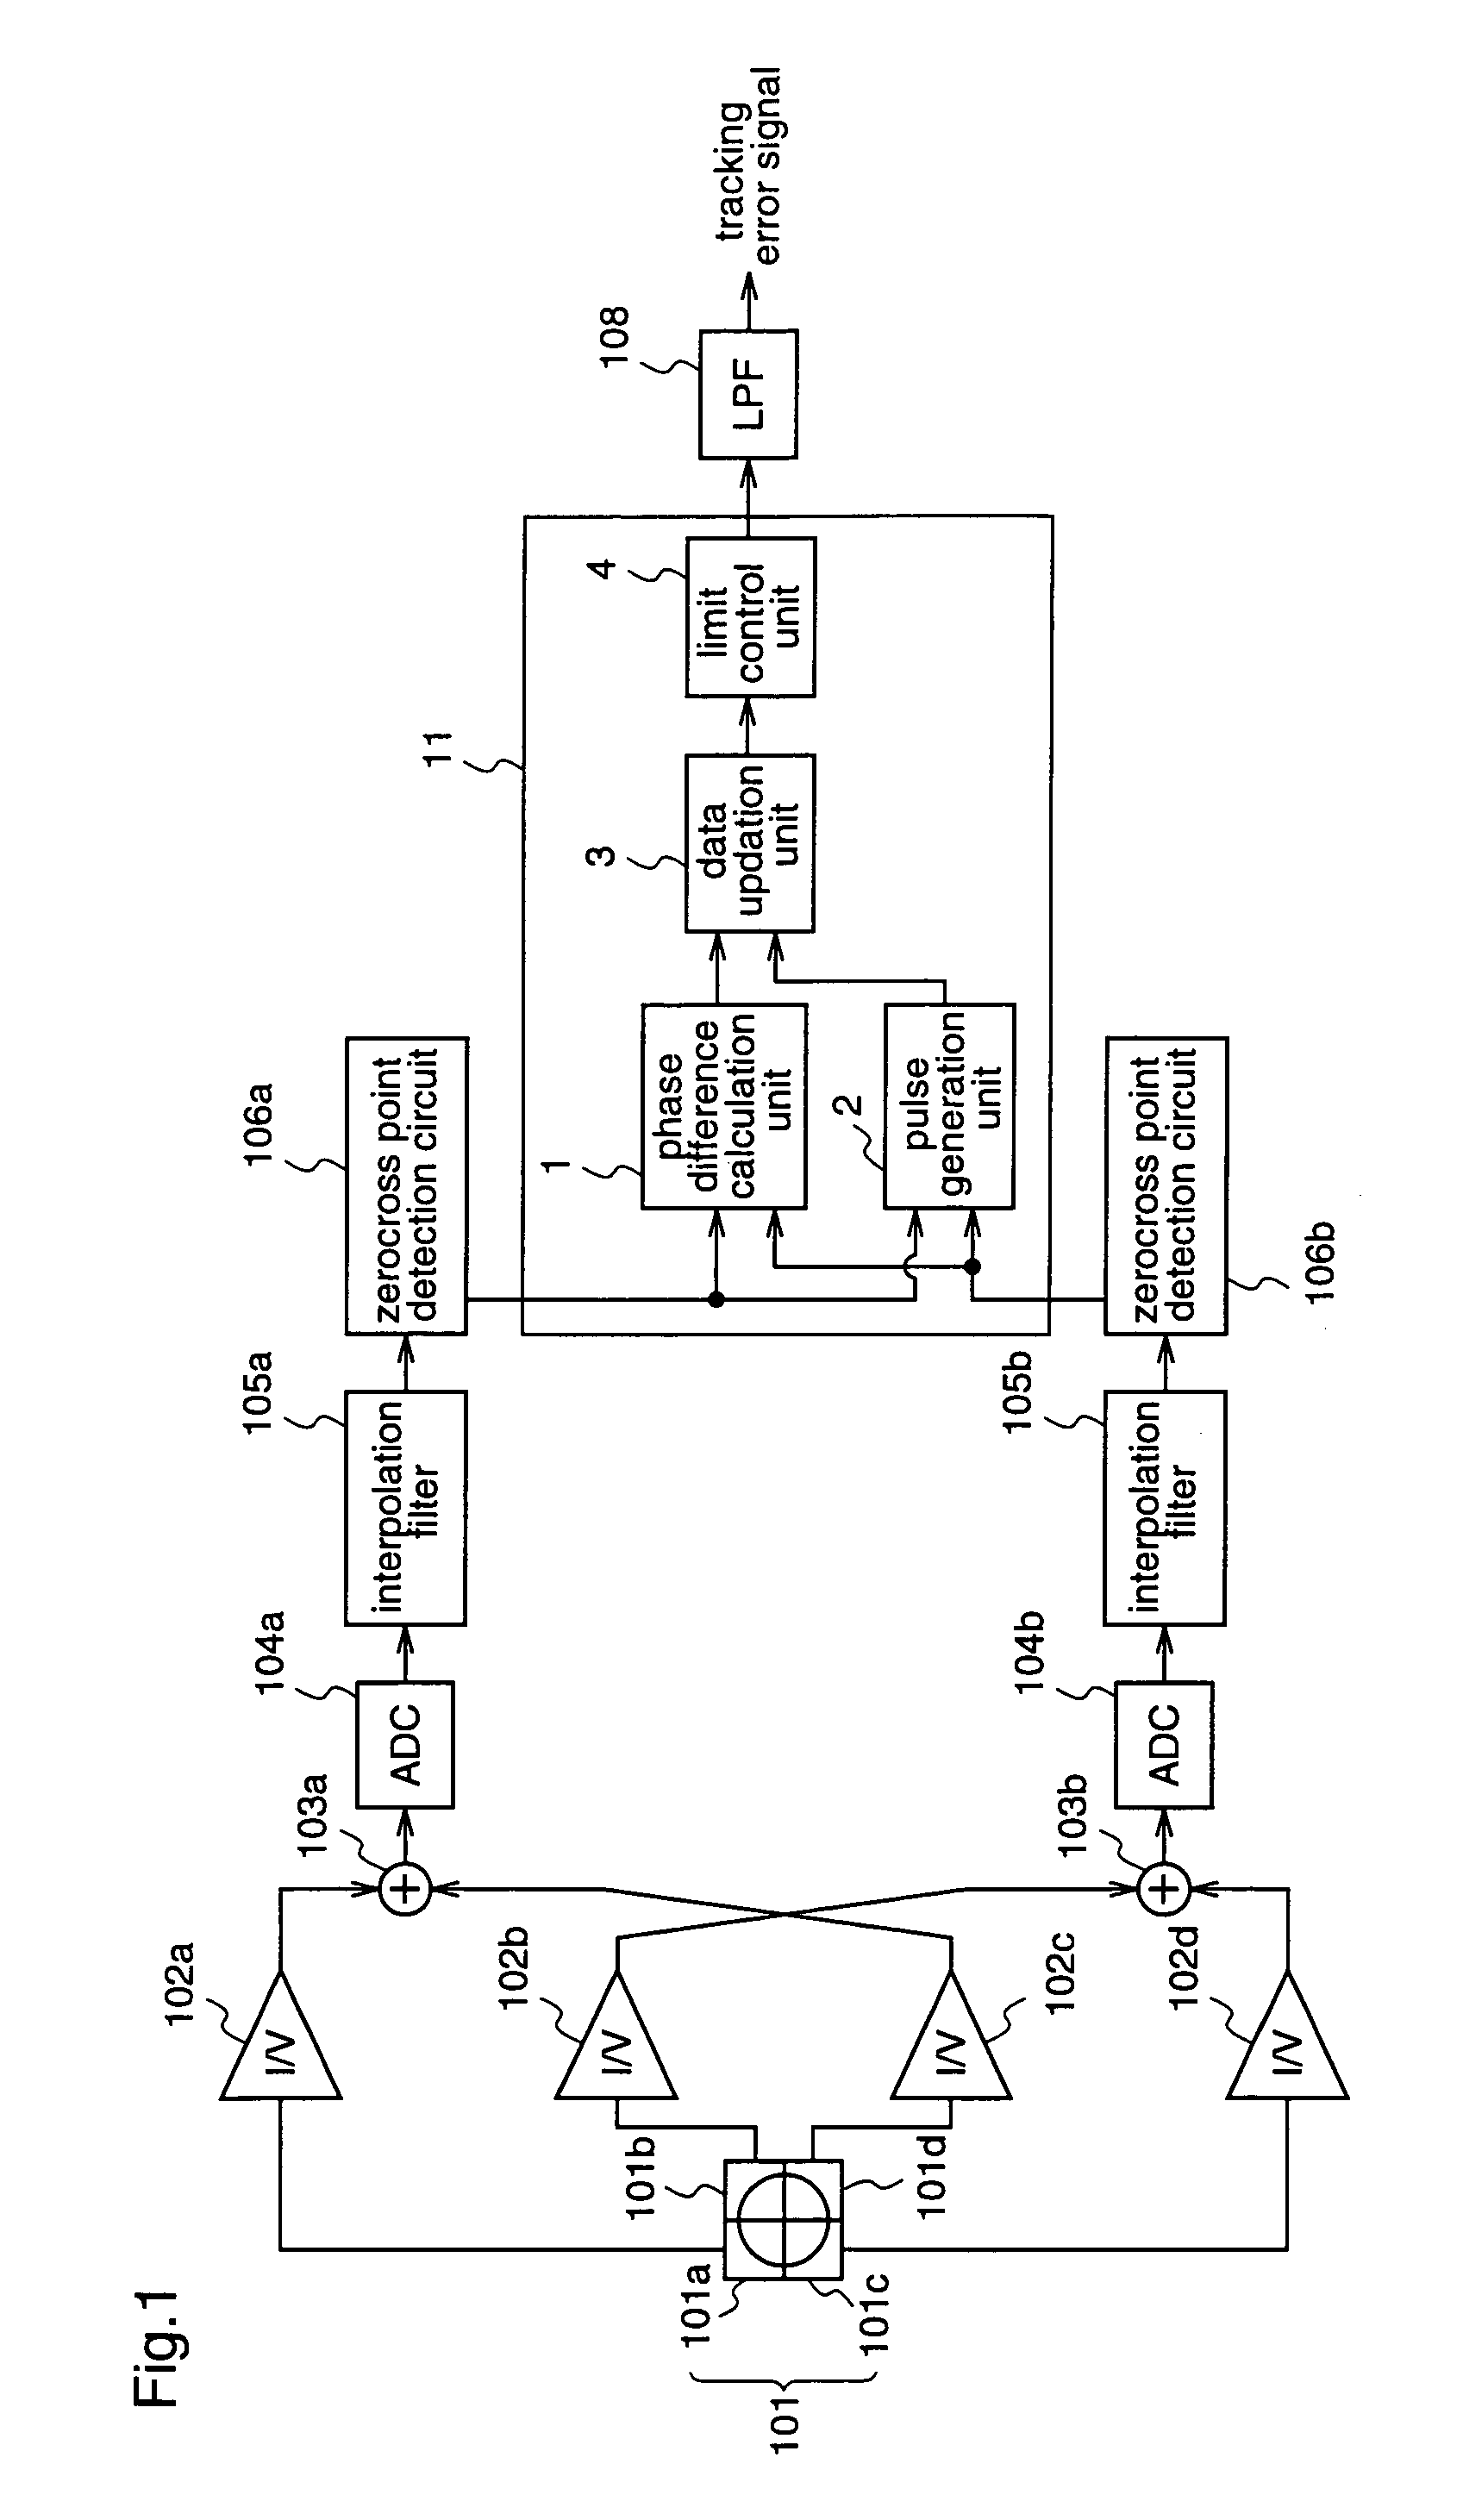 Tracking error detection apparatus including reduction in false tracking error detection during phase error detection